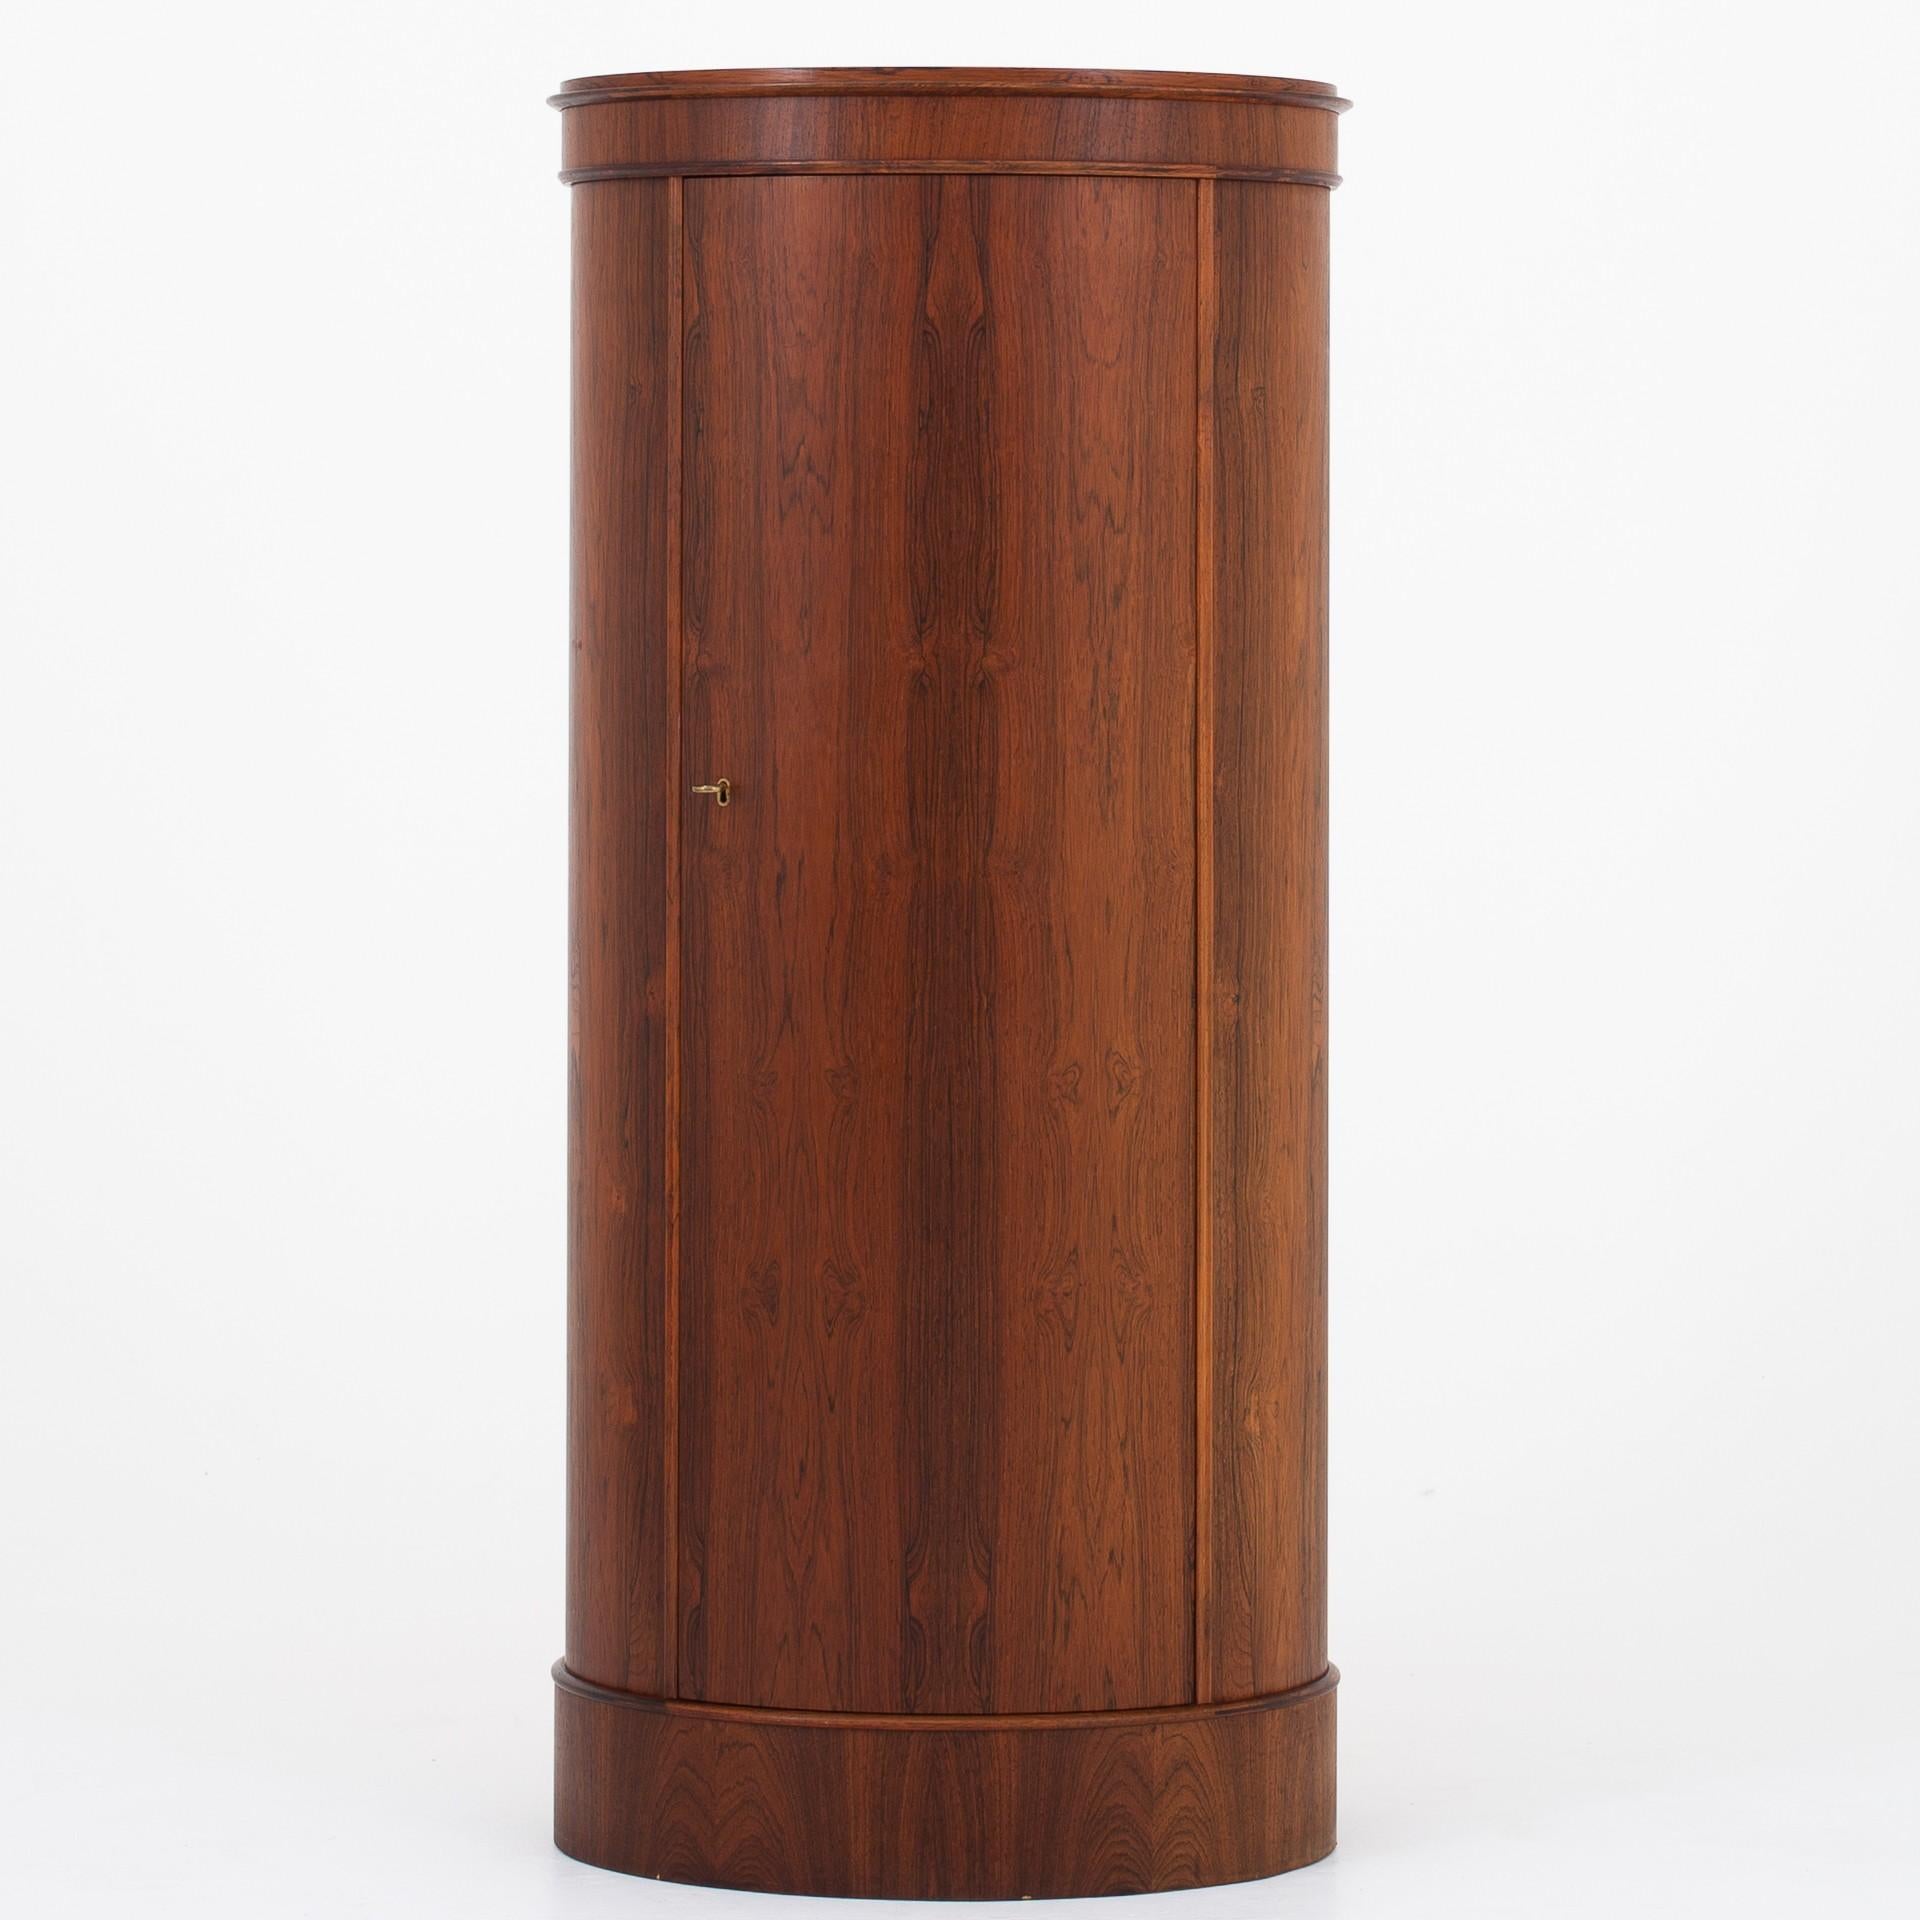 Rosewood One Pedestal Cabinets by Johannes Sorth